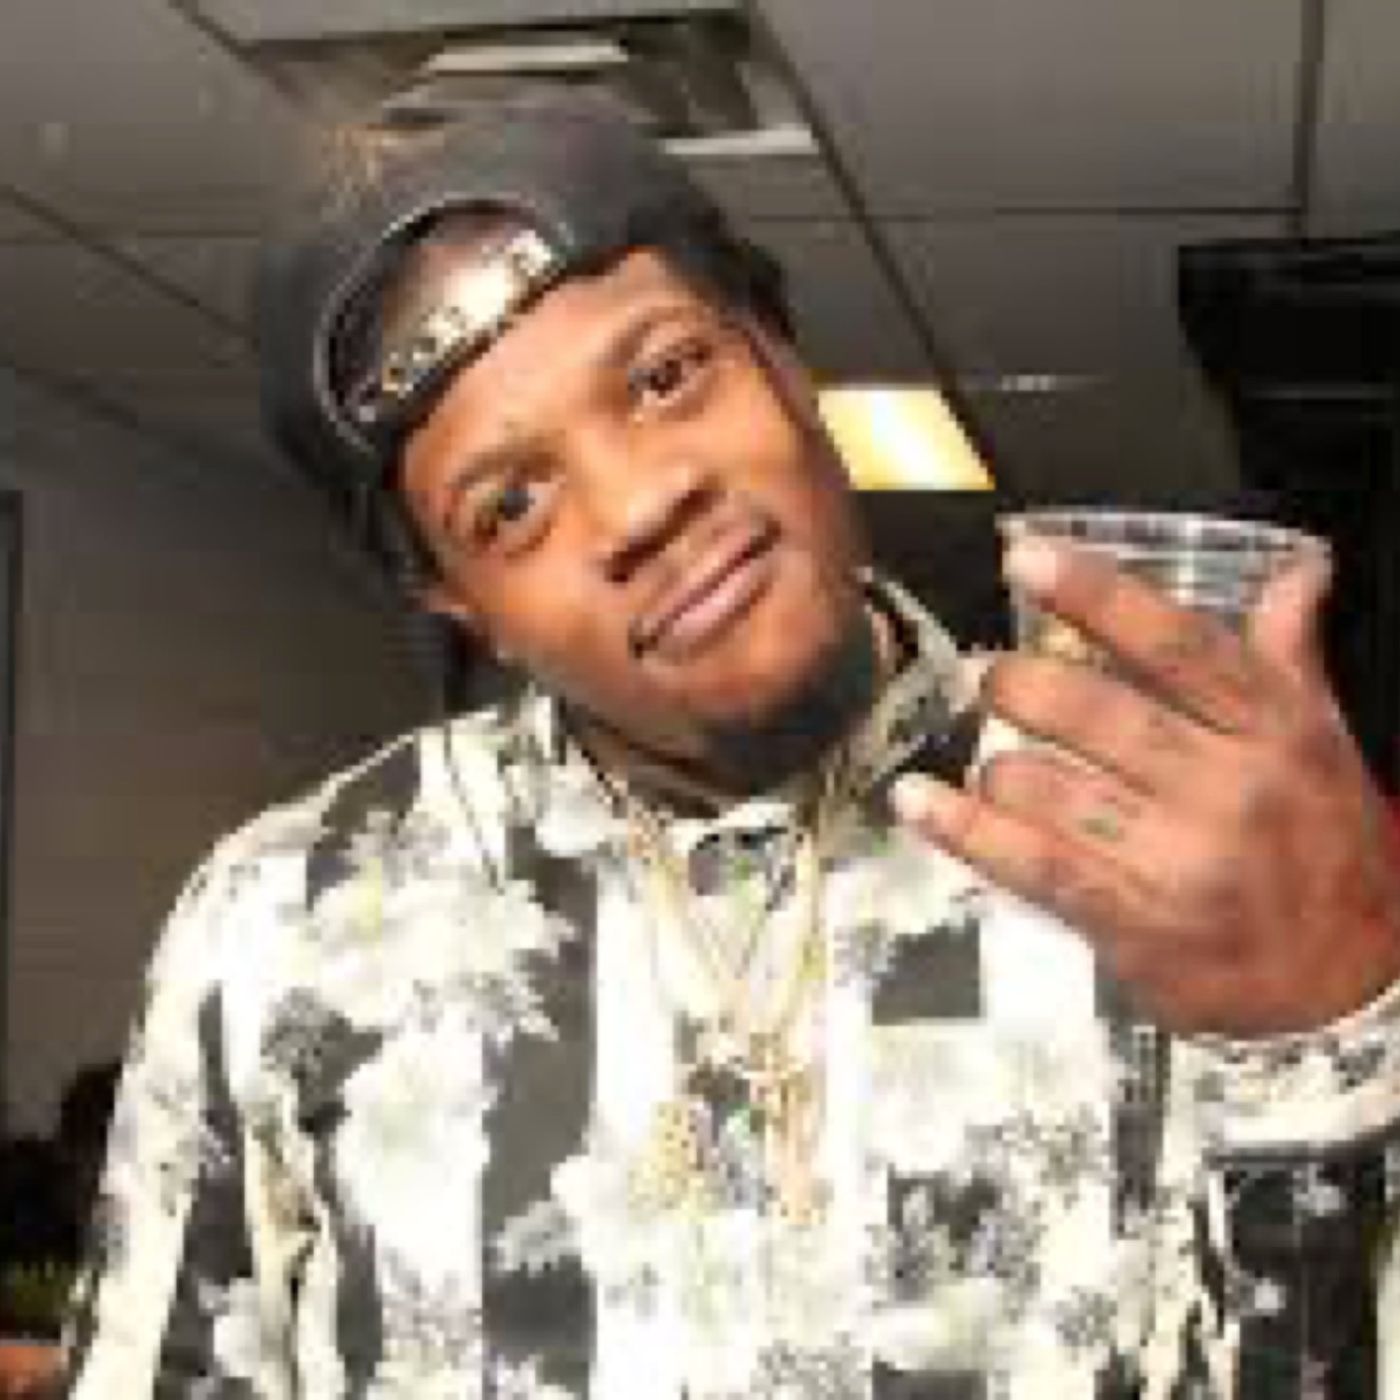 Rapper Rowdy Rebel Home, 29 Indicted On Federal Charges, Justblow600 Arrested